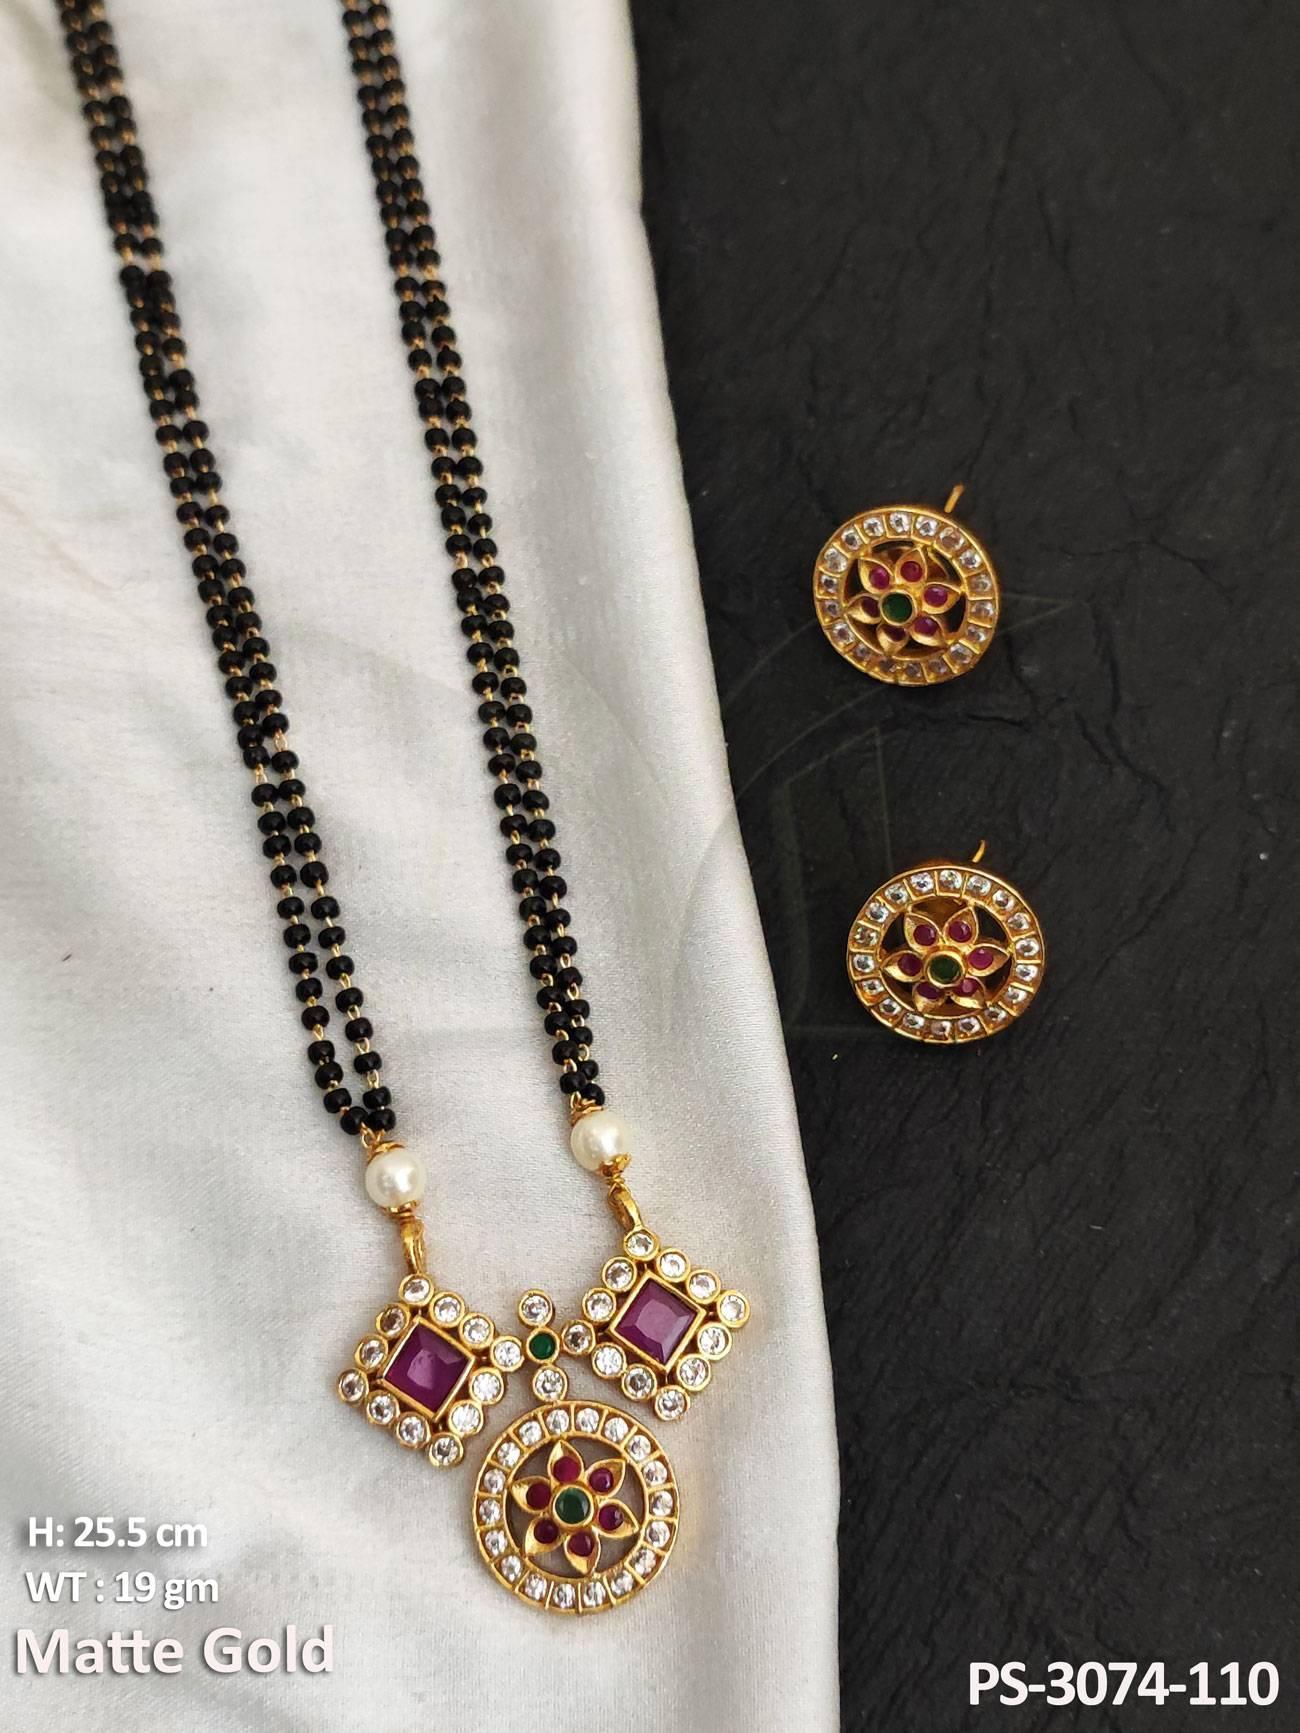 This stunning pendant set is crafted using matte gold polish with a fancy design. Perfect for special occasions, this set is sure to make you shine.